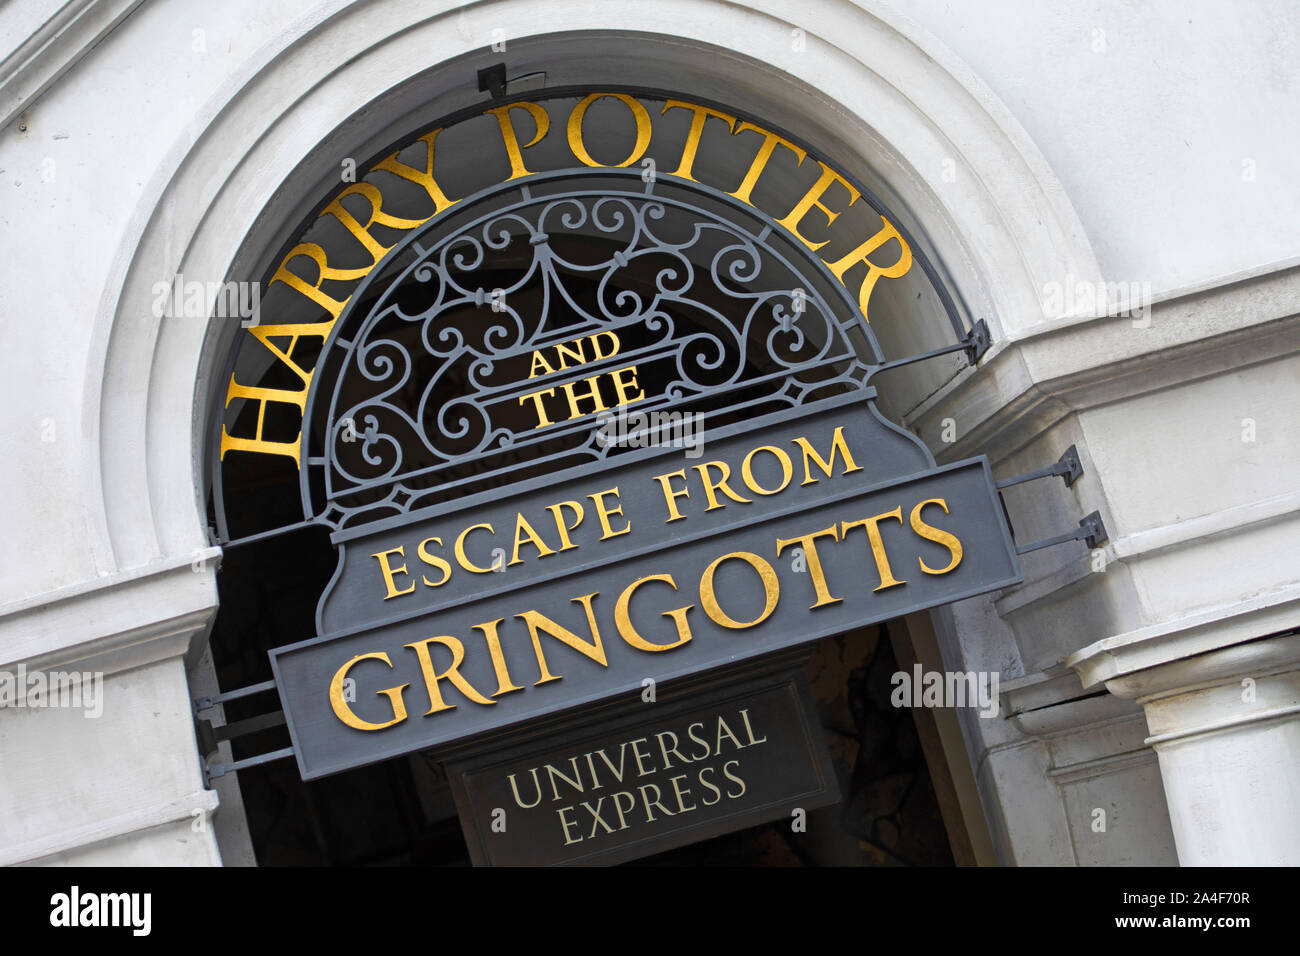 Escape from Gringotts, Bank,  Universal Express entrance to Ride, Diagon Alley, Wizarding World of Harry Potter, Universal Studios Resort, Orlando, Stock Photo